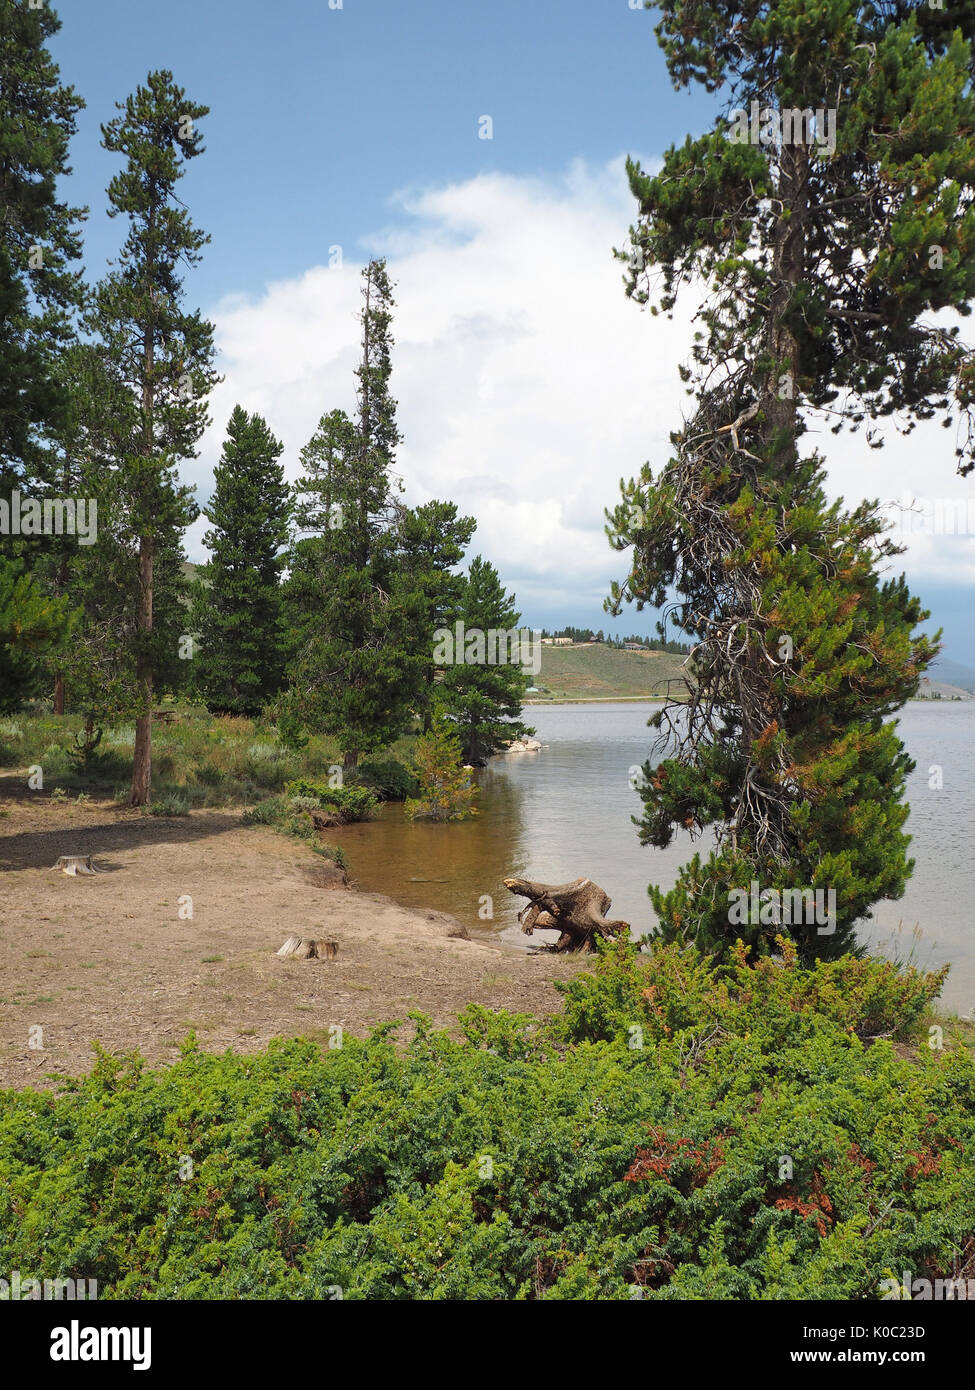 A small clearing by the Granby Lake in Colorado.  There is a dead tree stump and evergreen trees.  The sky overhead is bright blue with white puffy cl Stock Photo